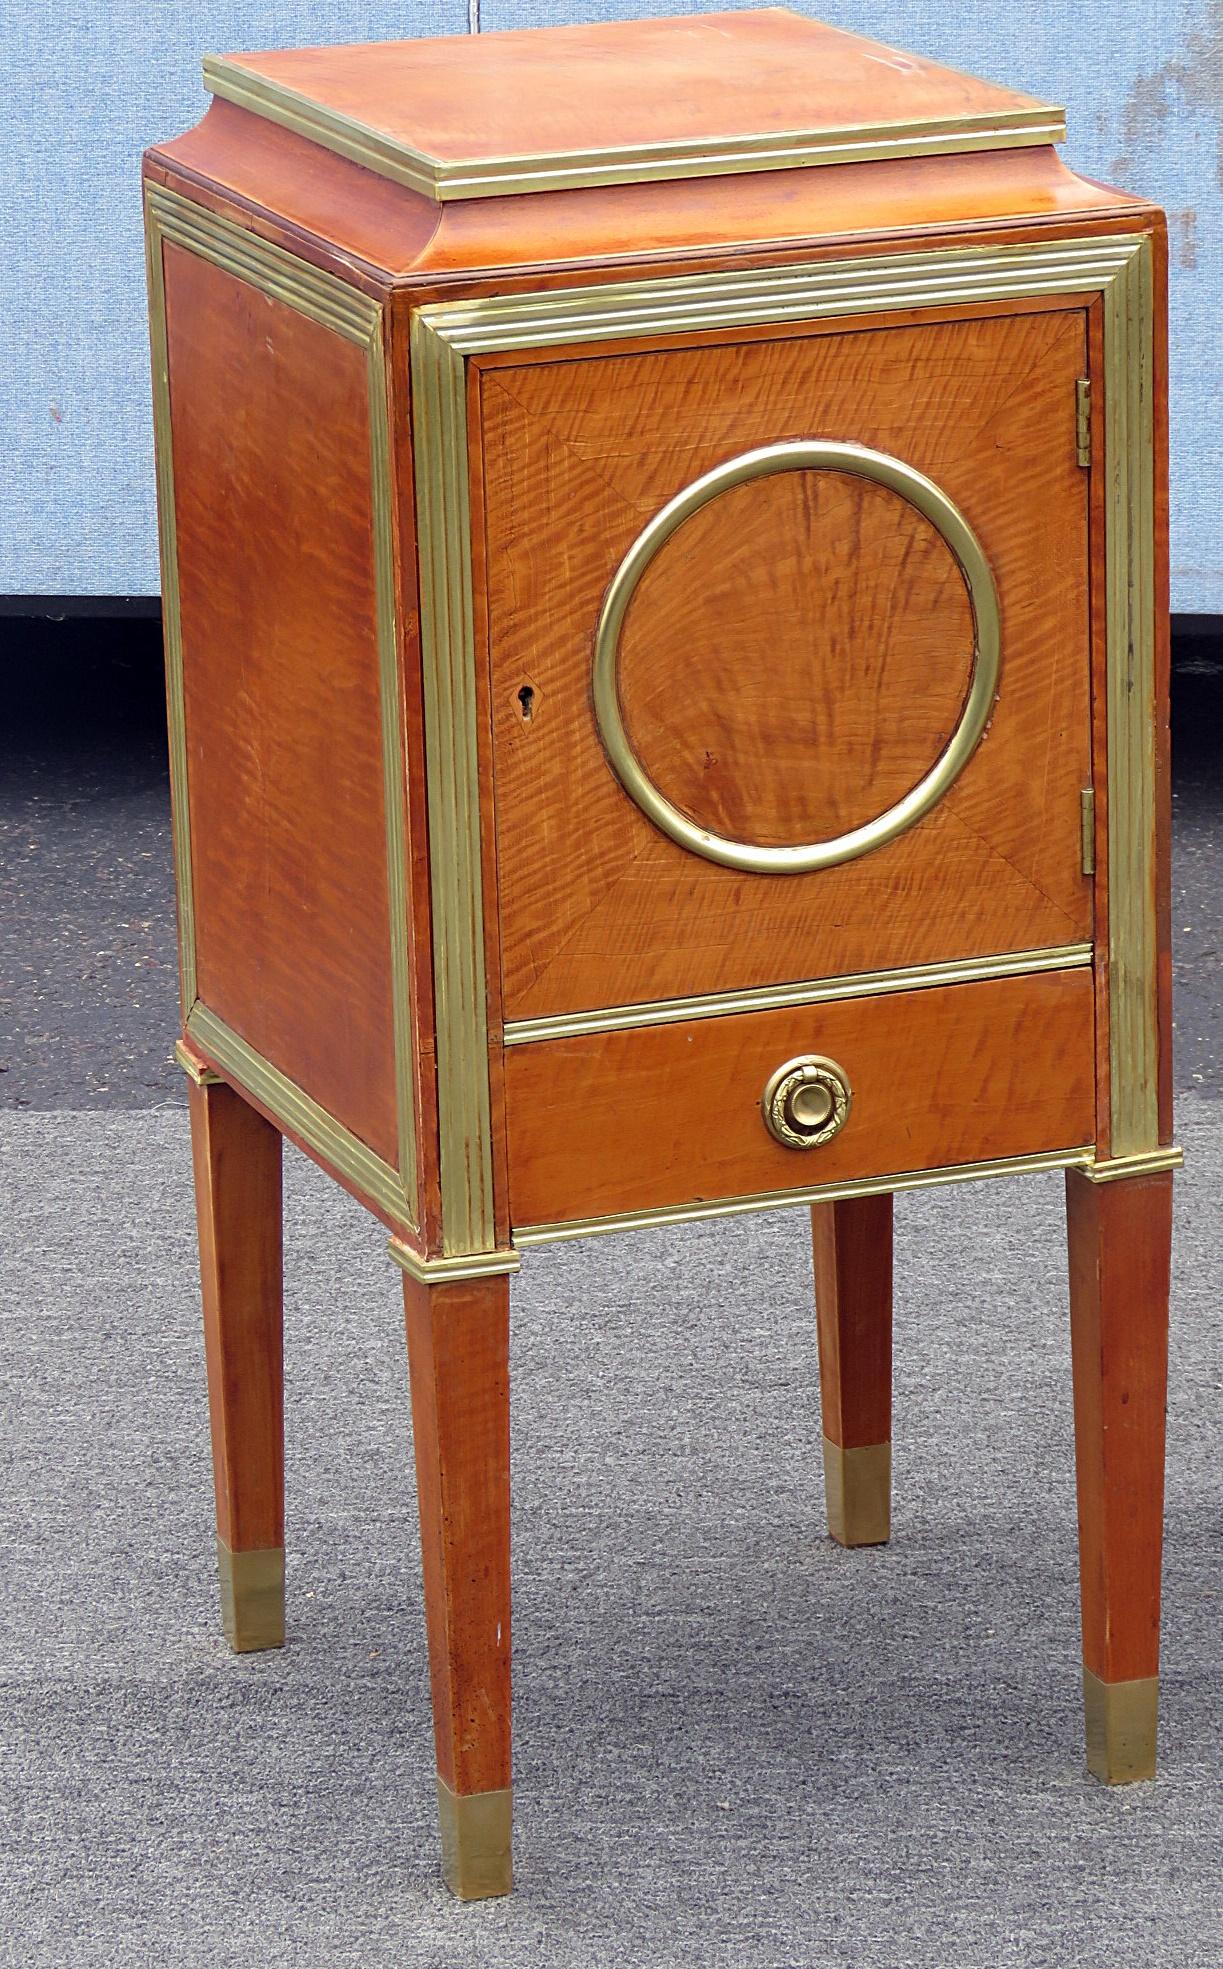 Pair of Russian Baltic style brass-mounted nightstands with one door over one drawer.